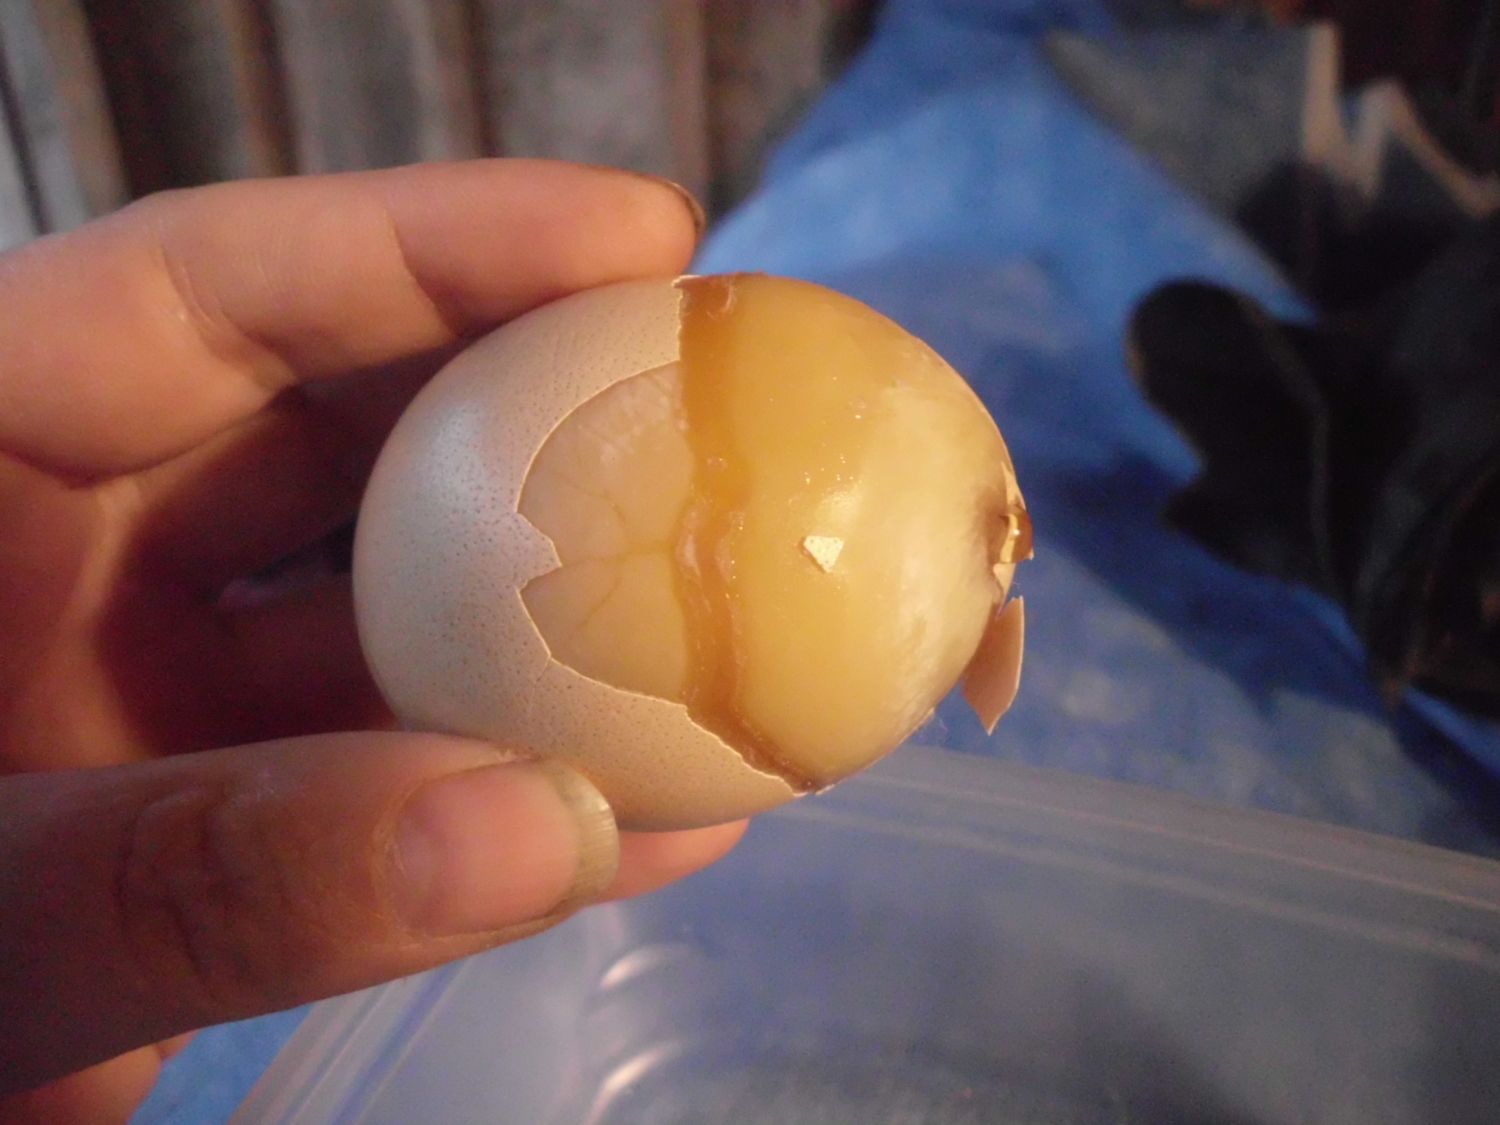 Cracking Open Rotten Eggs From The Incubator - EW the stench!! 